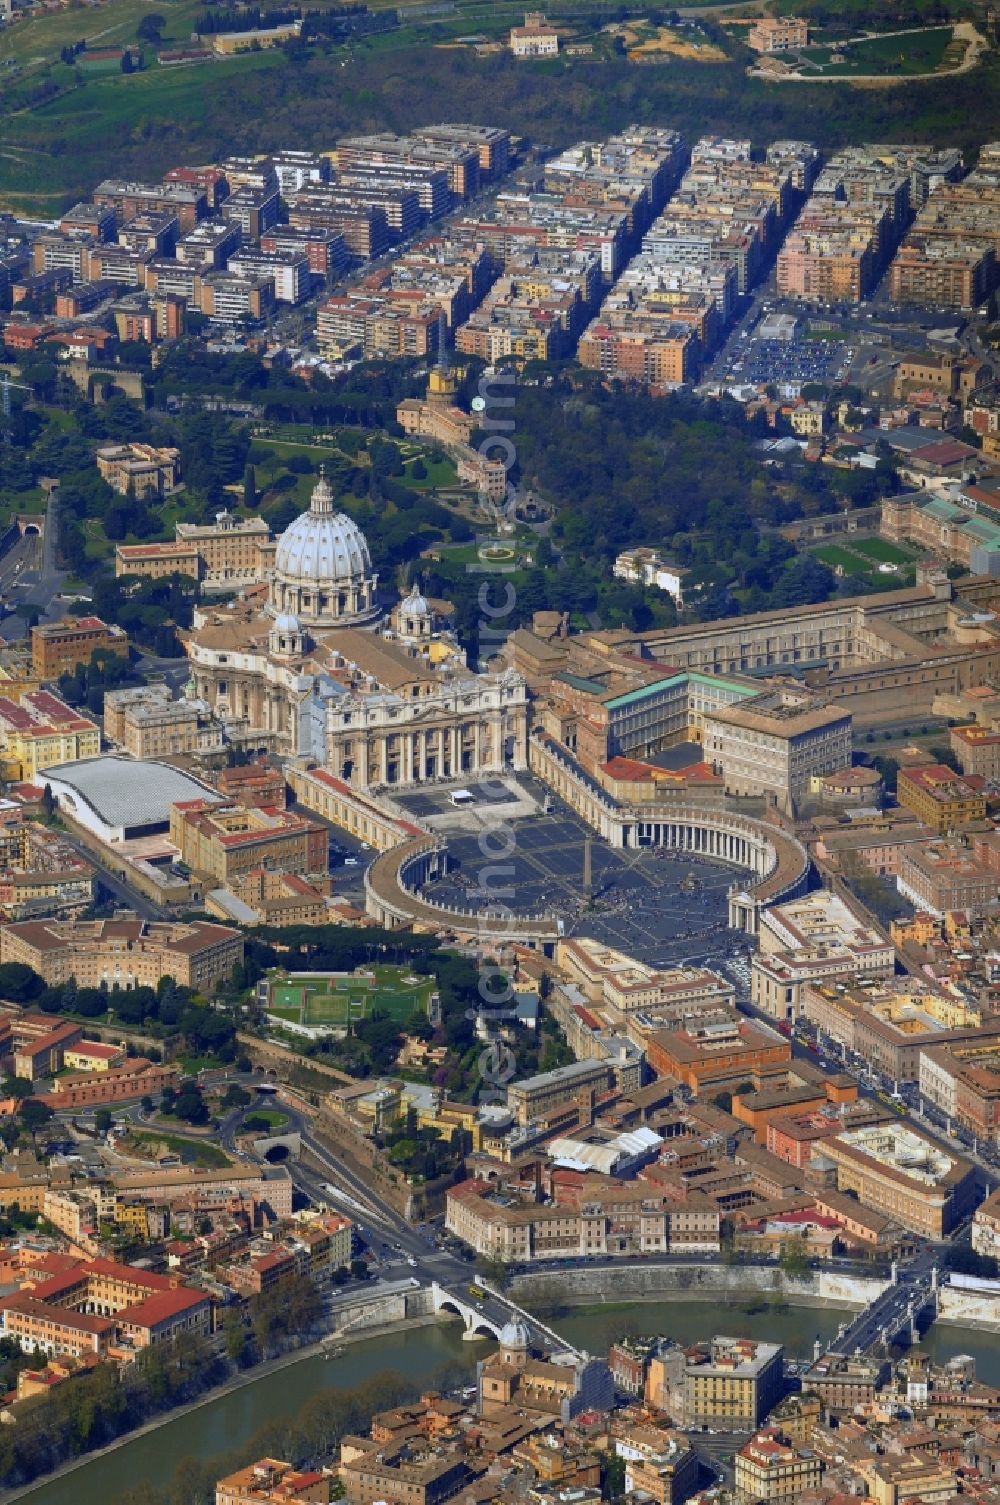 Aerial image Rom - Vatican in Vatican City with St Peter's Square - an enclave in Rome, Italy